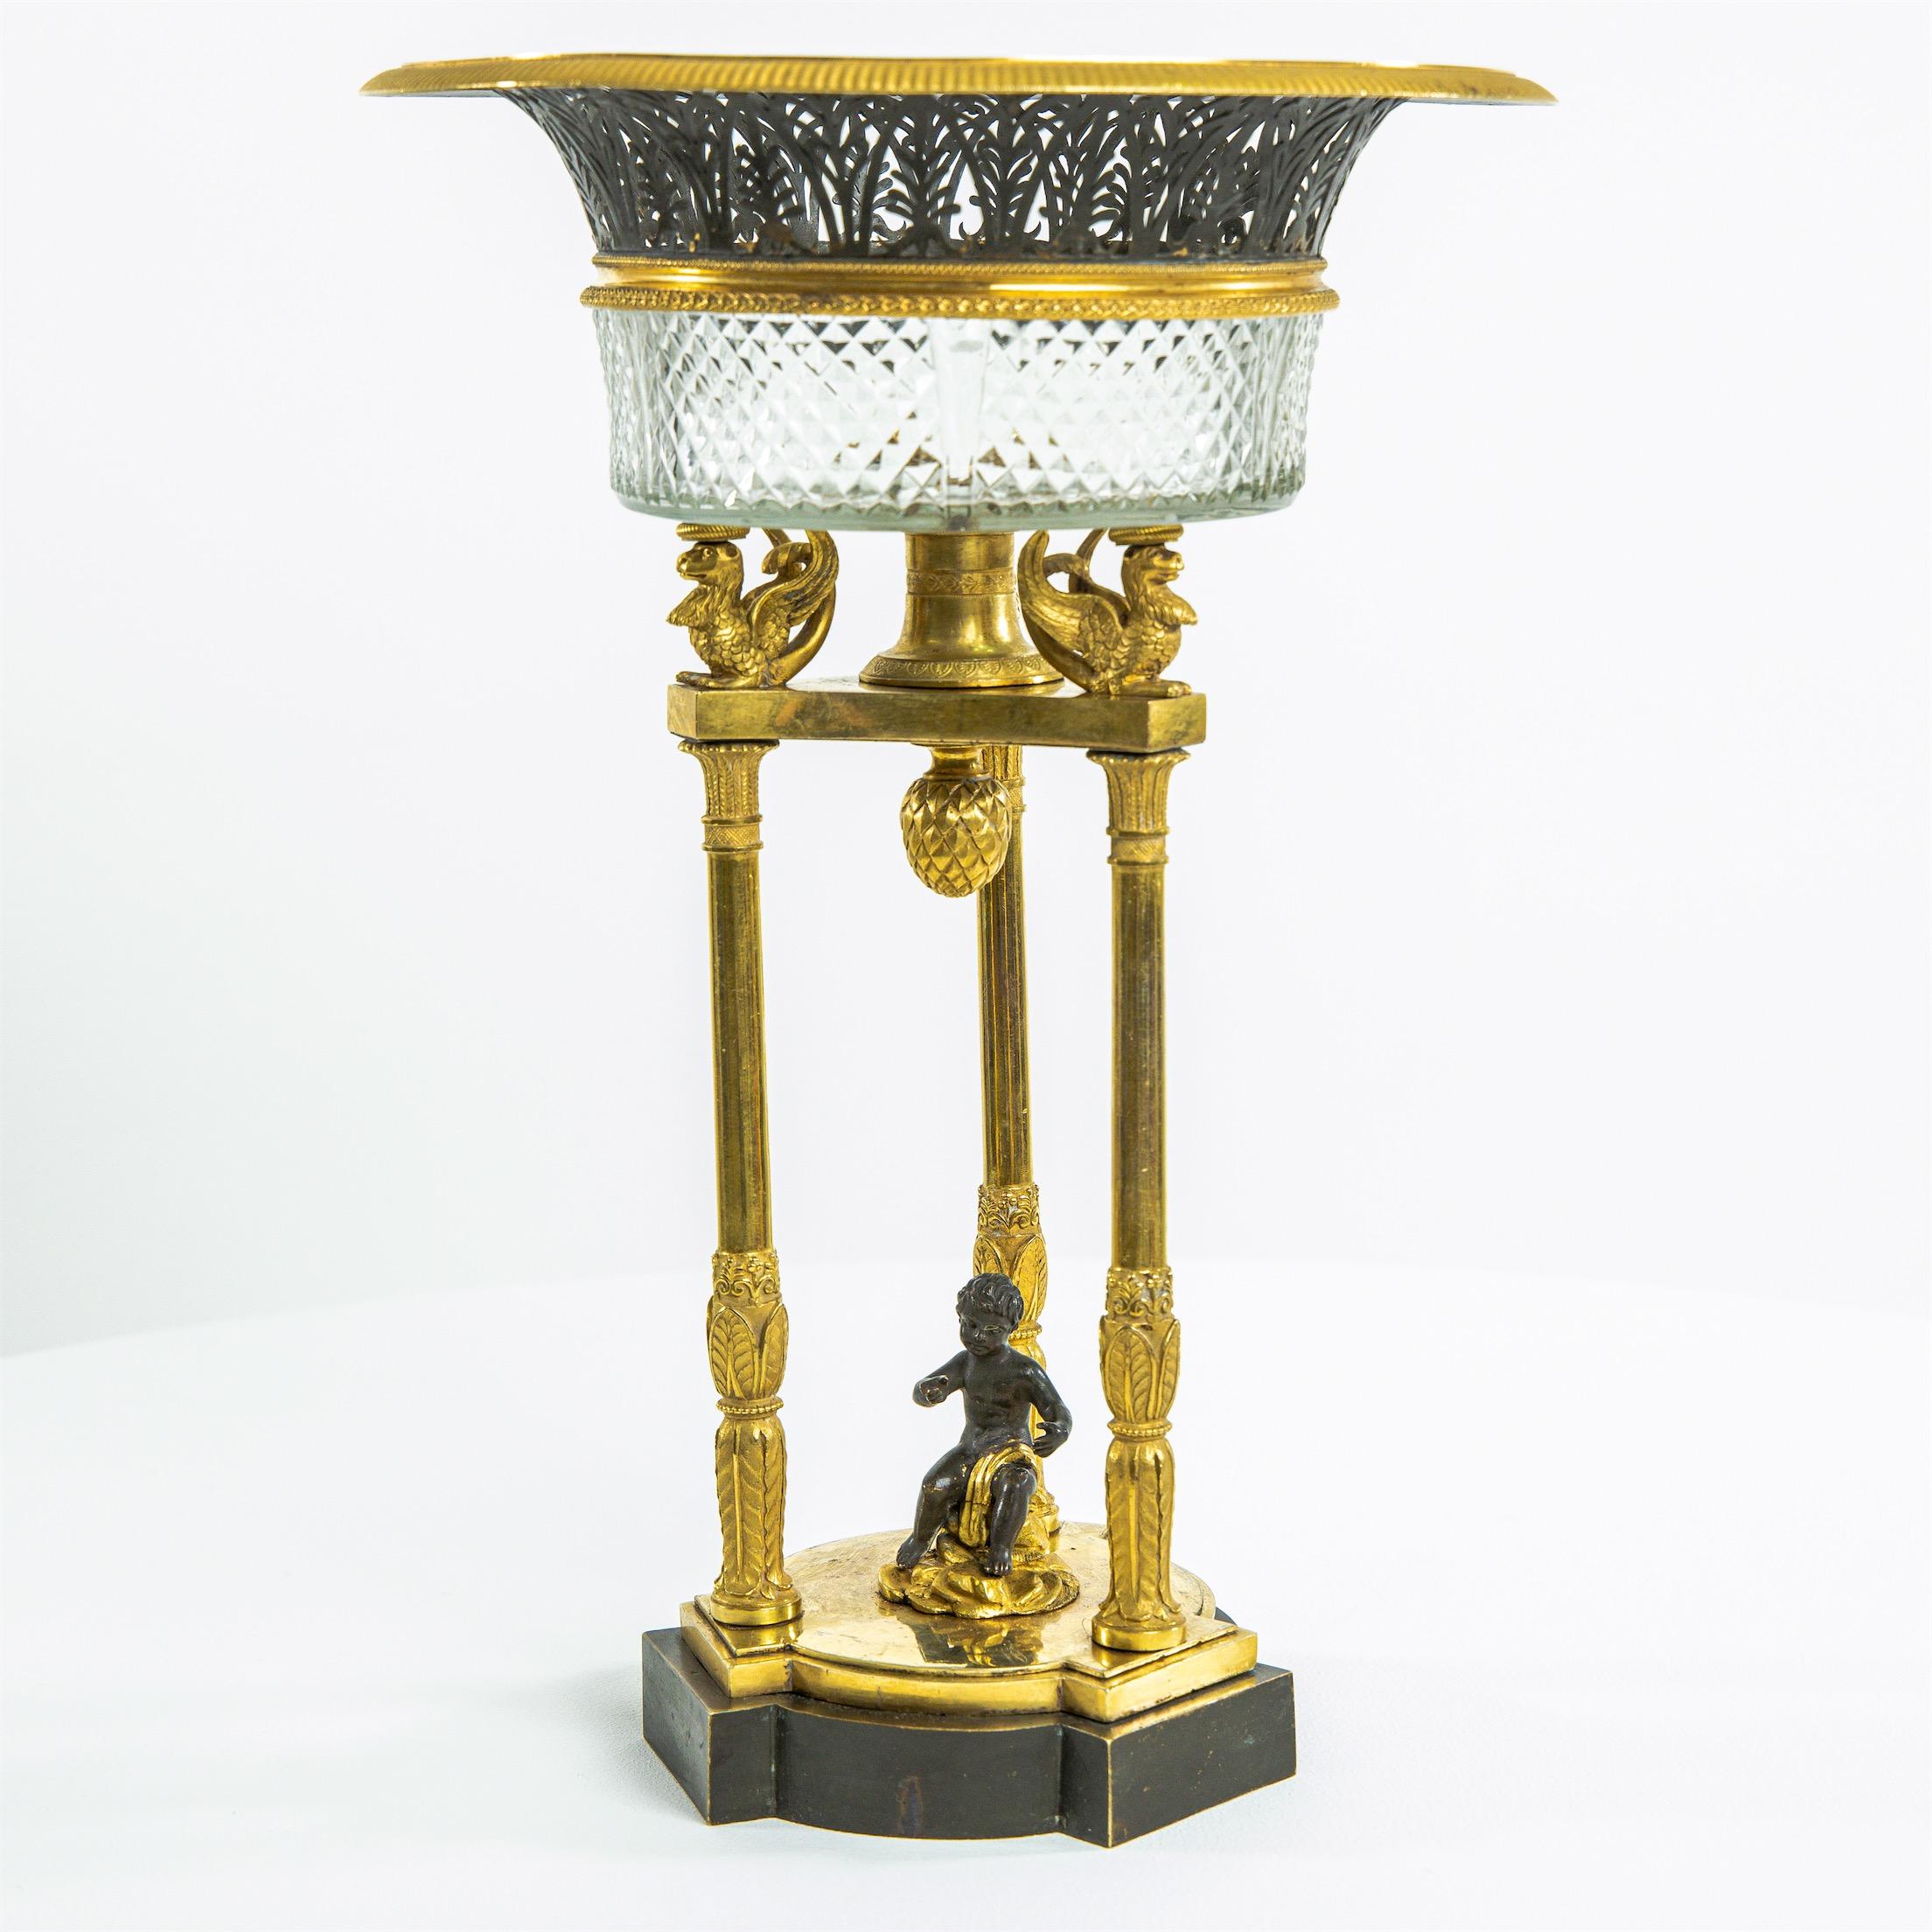 Empire centerpiece made of cut glass and fire-gilded bronze with griffin decor and small putto figure in the center.